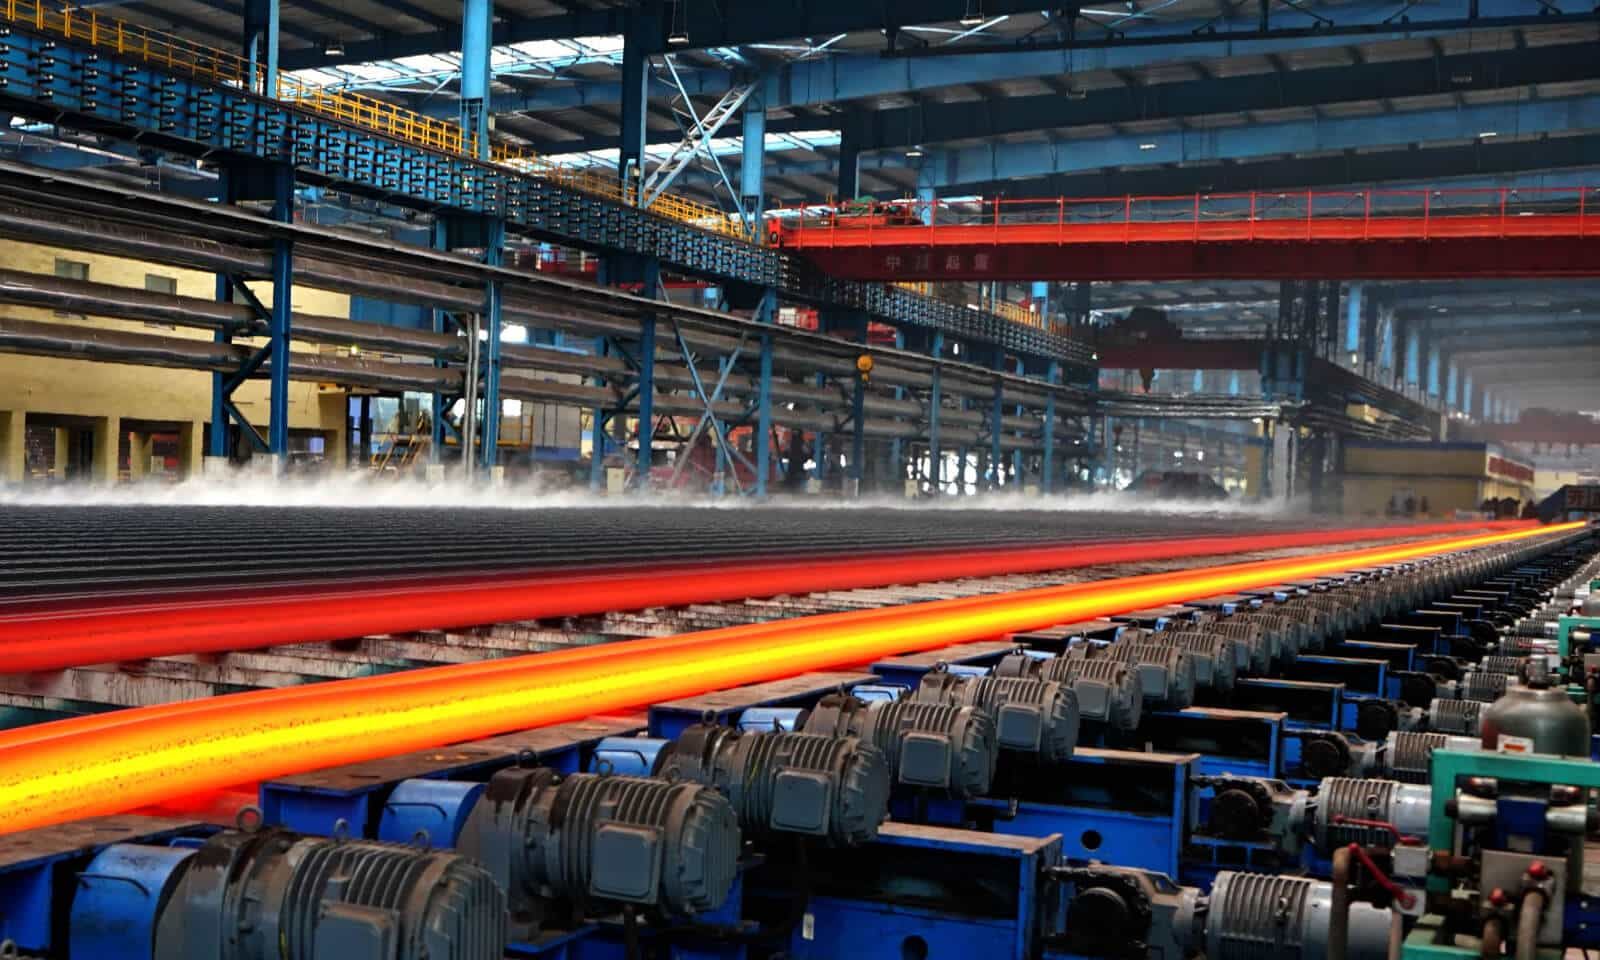 Germany's steel production remained weak in the first half of the year